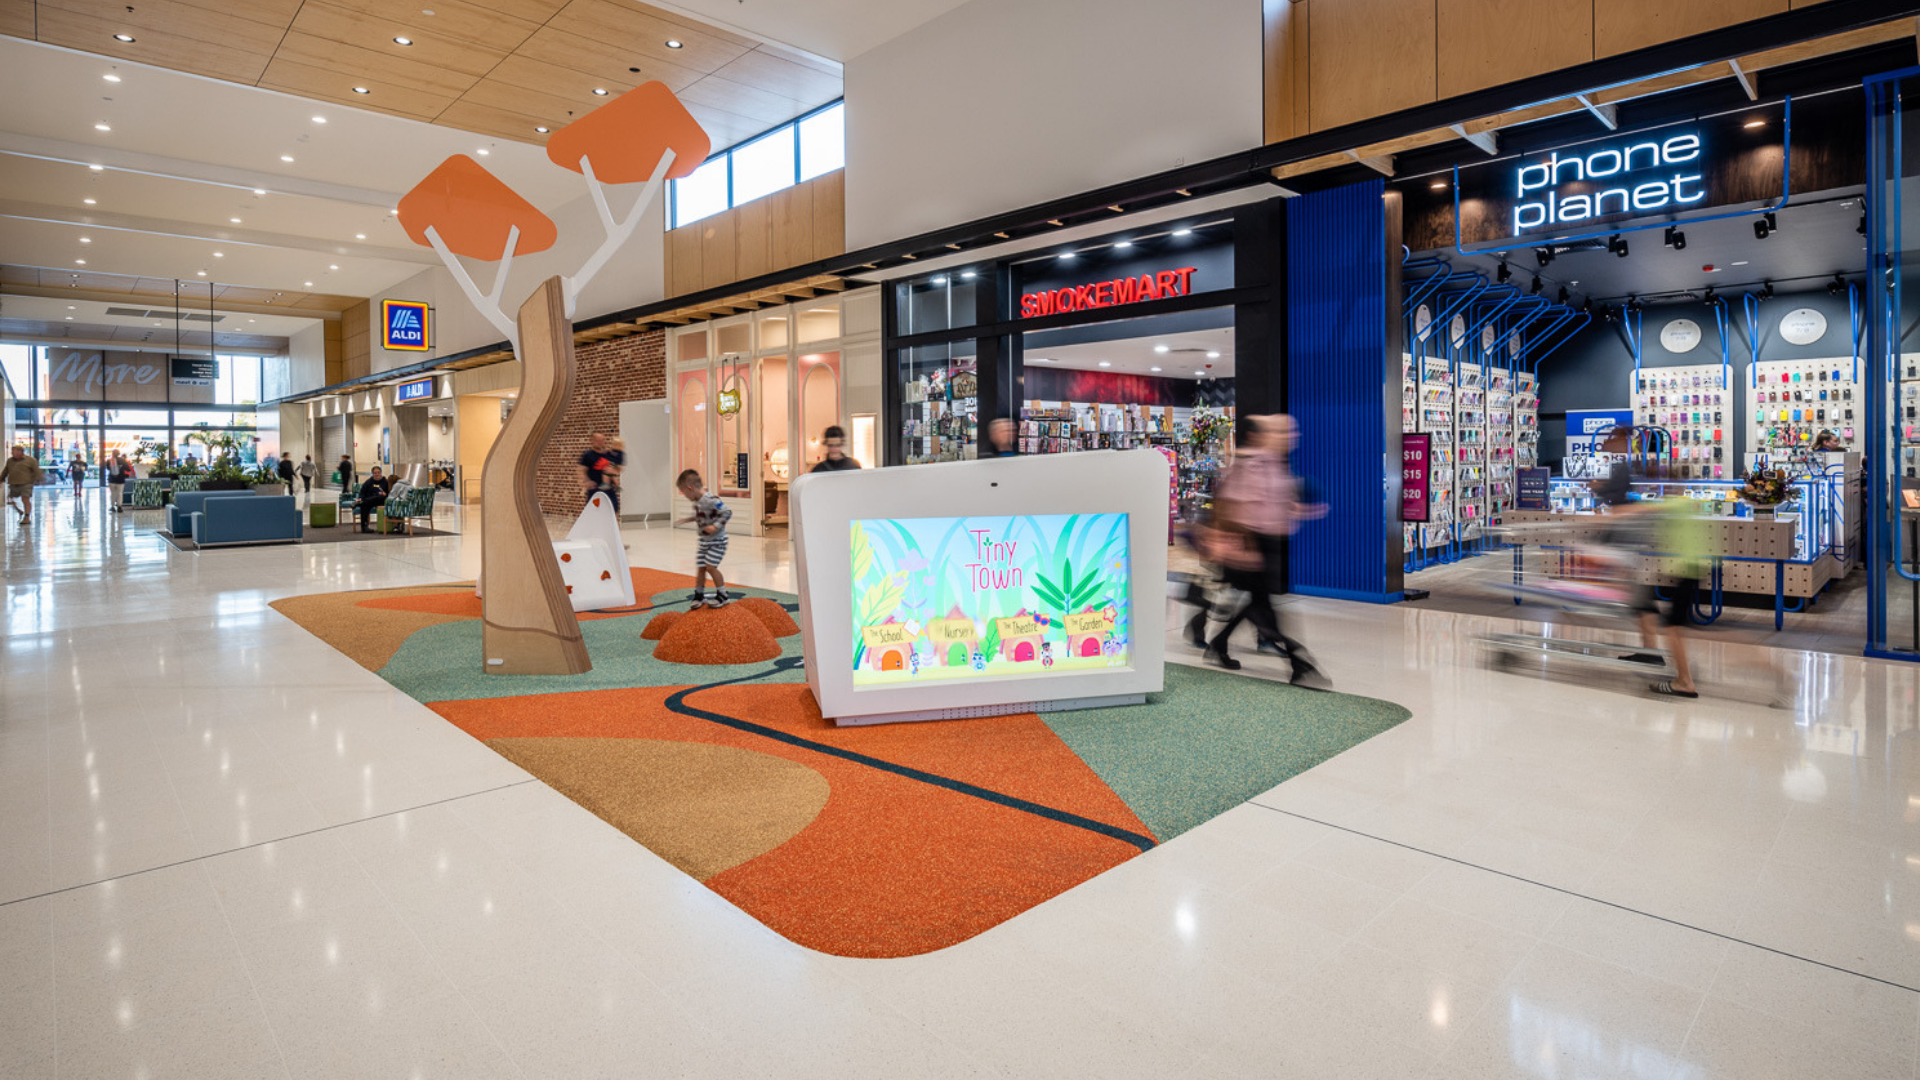 Port Adelaide Plaza Childrens Play Area